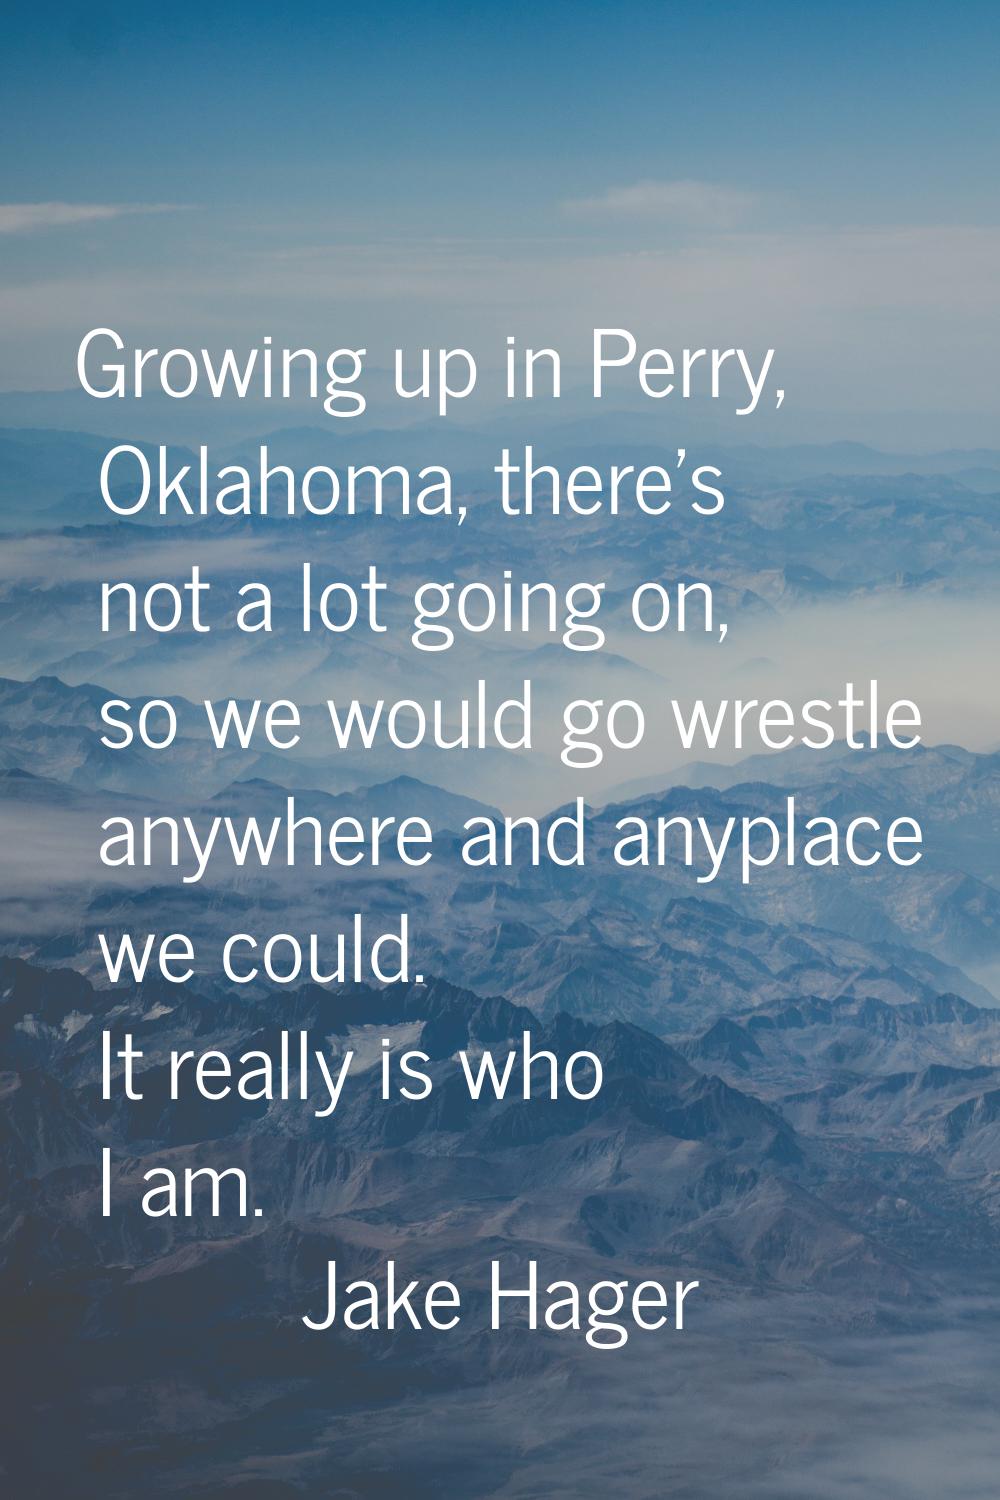 Growing up in Perry, Oklahoma, there's not a lot going on, so we would go wrestle anywhere and anyp